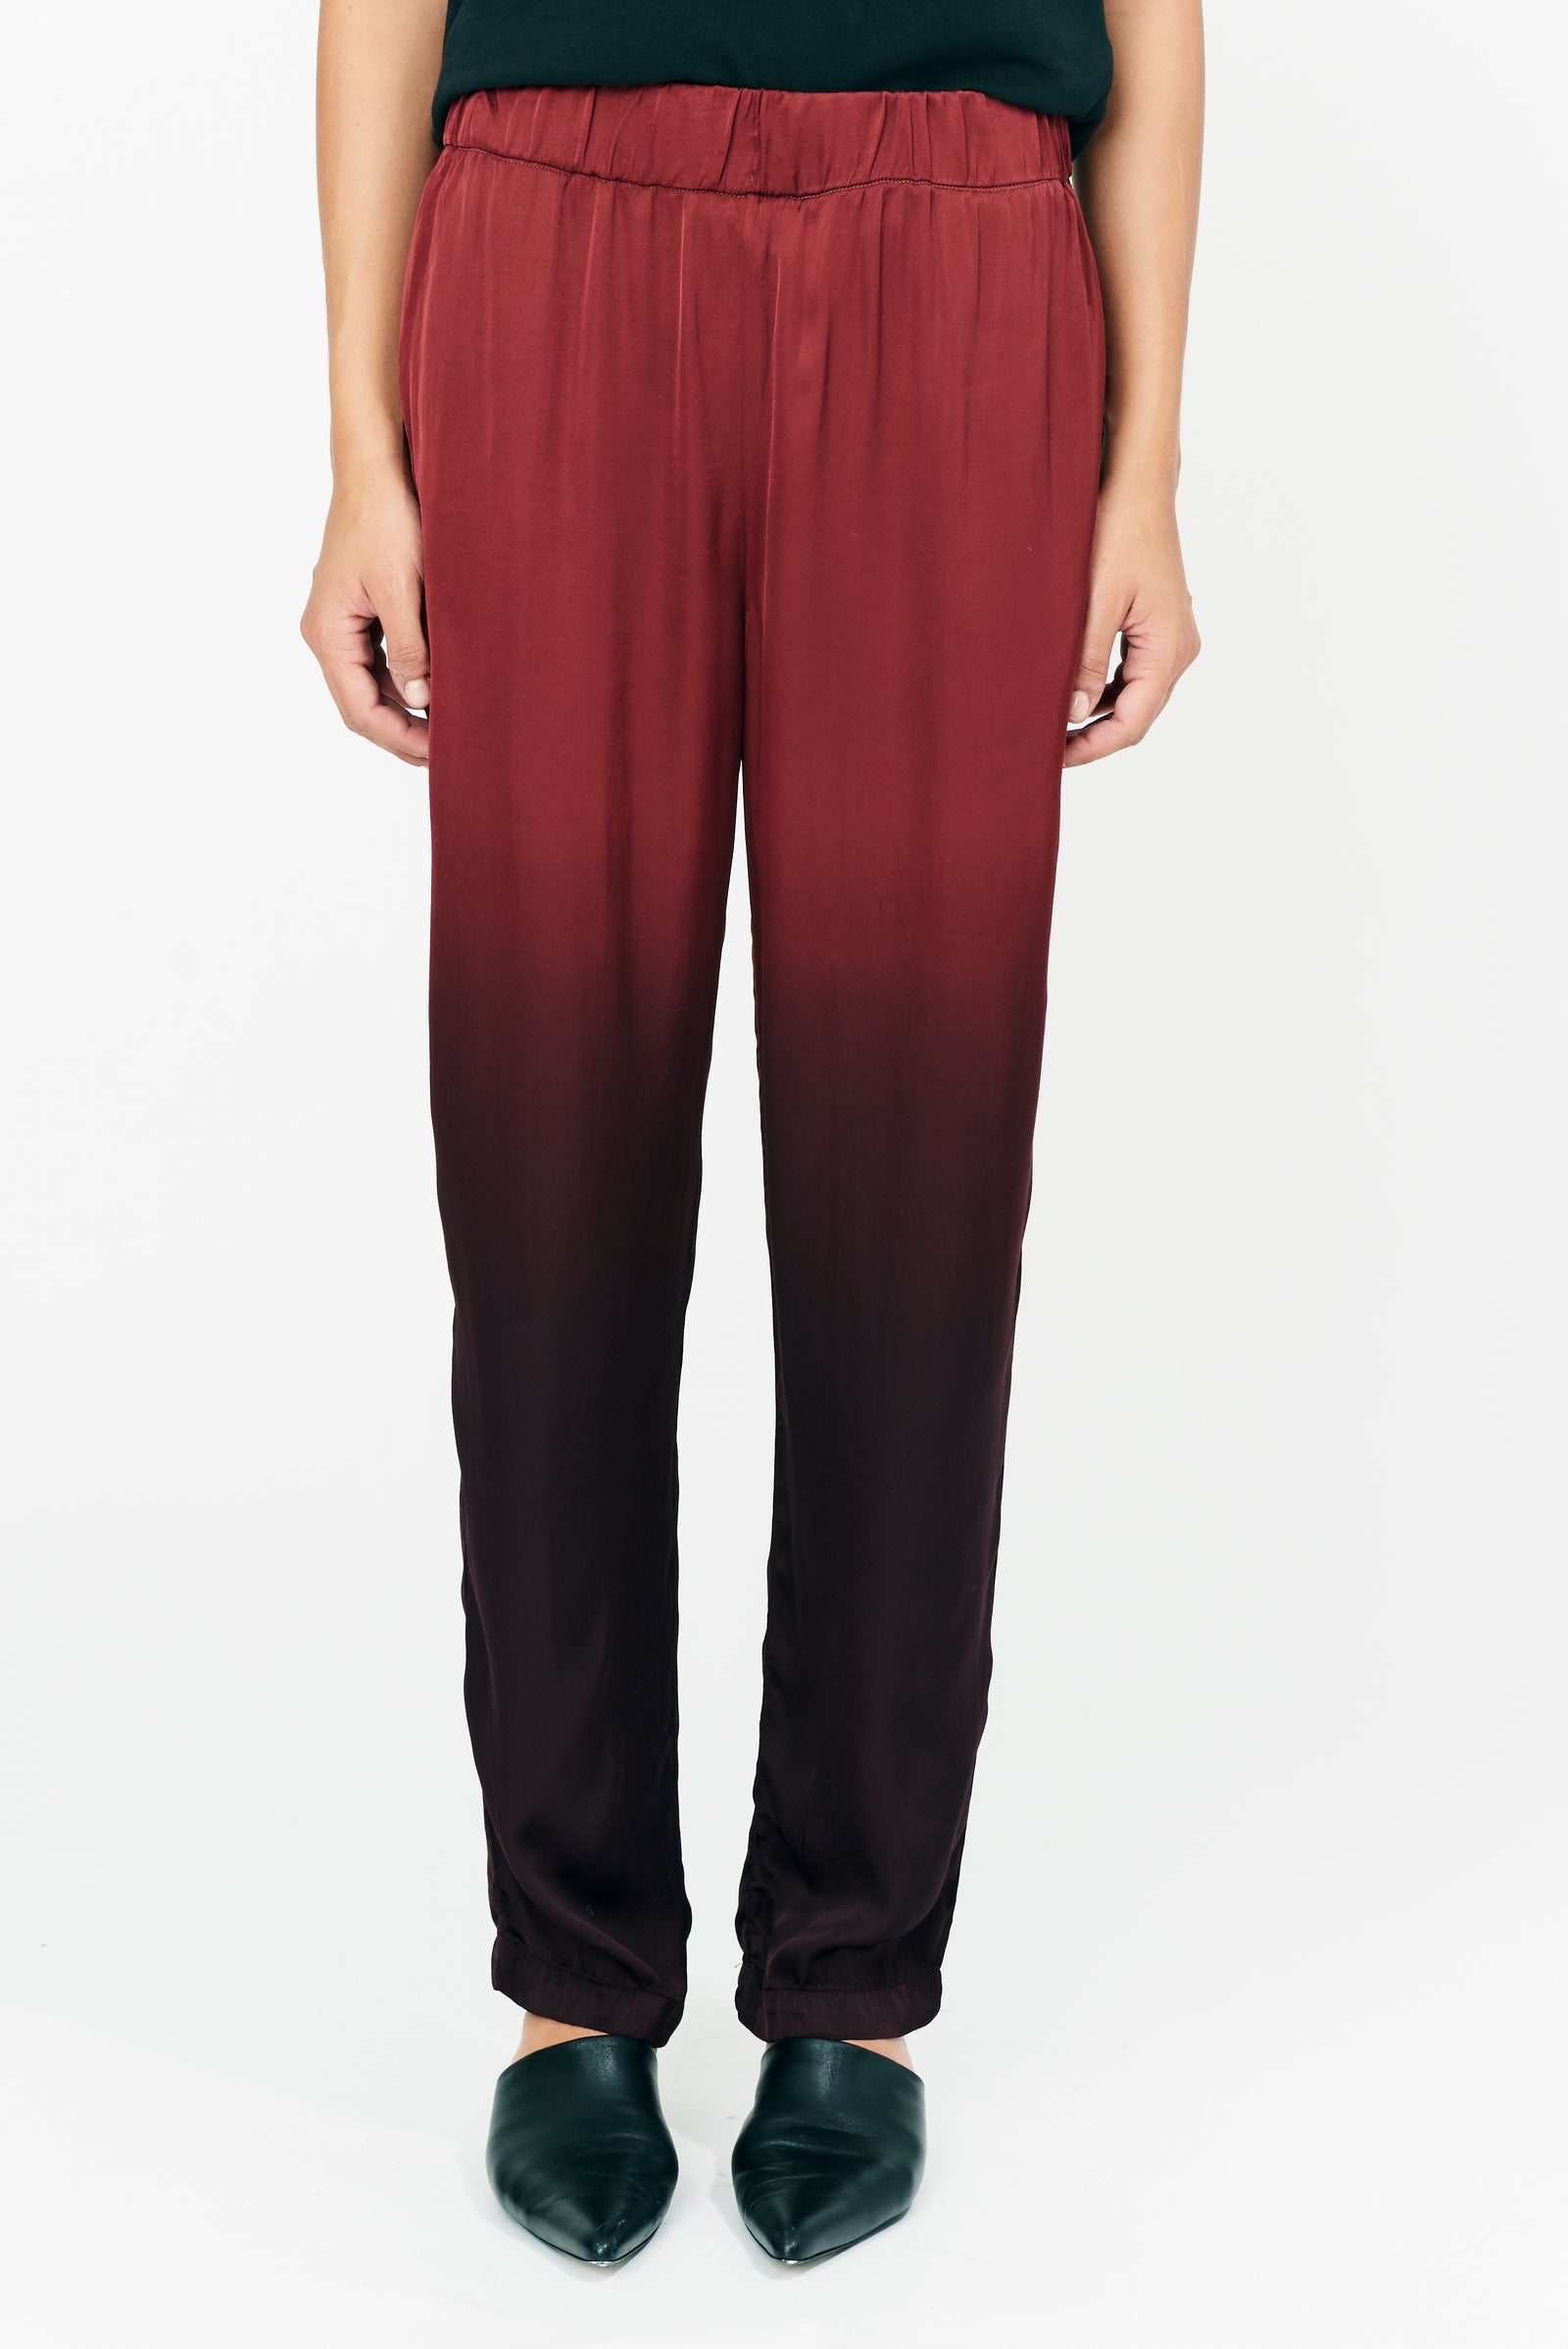 Sienna Gradient Ghost Ranch Matte Satin Fez Pant Front Close-Up View